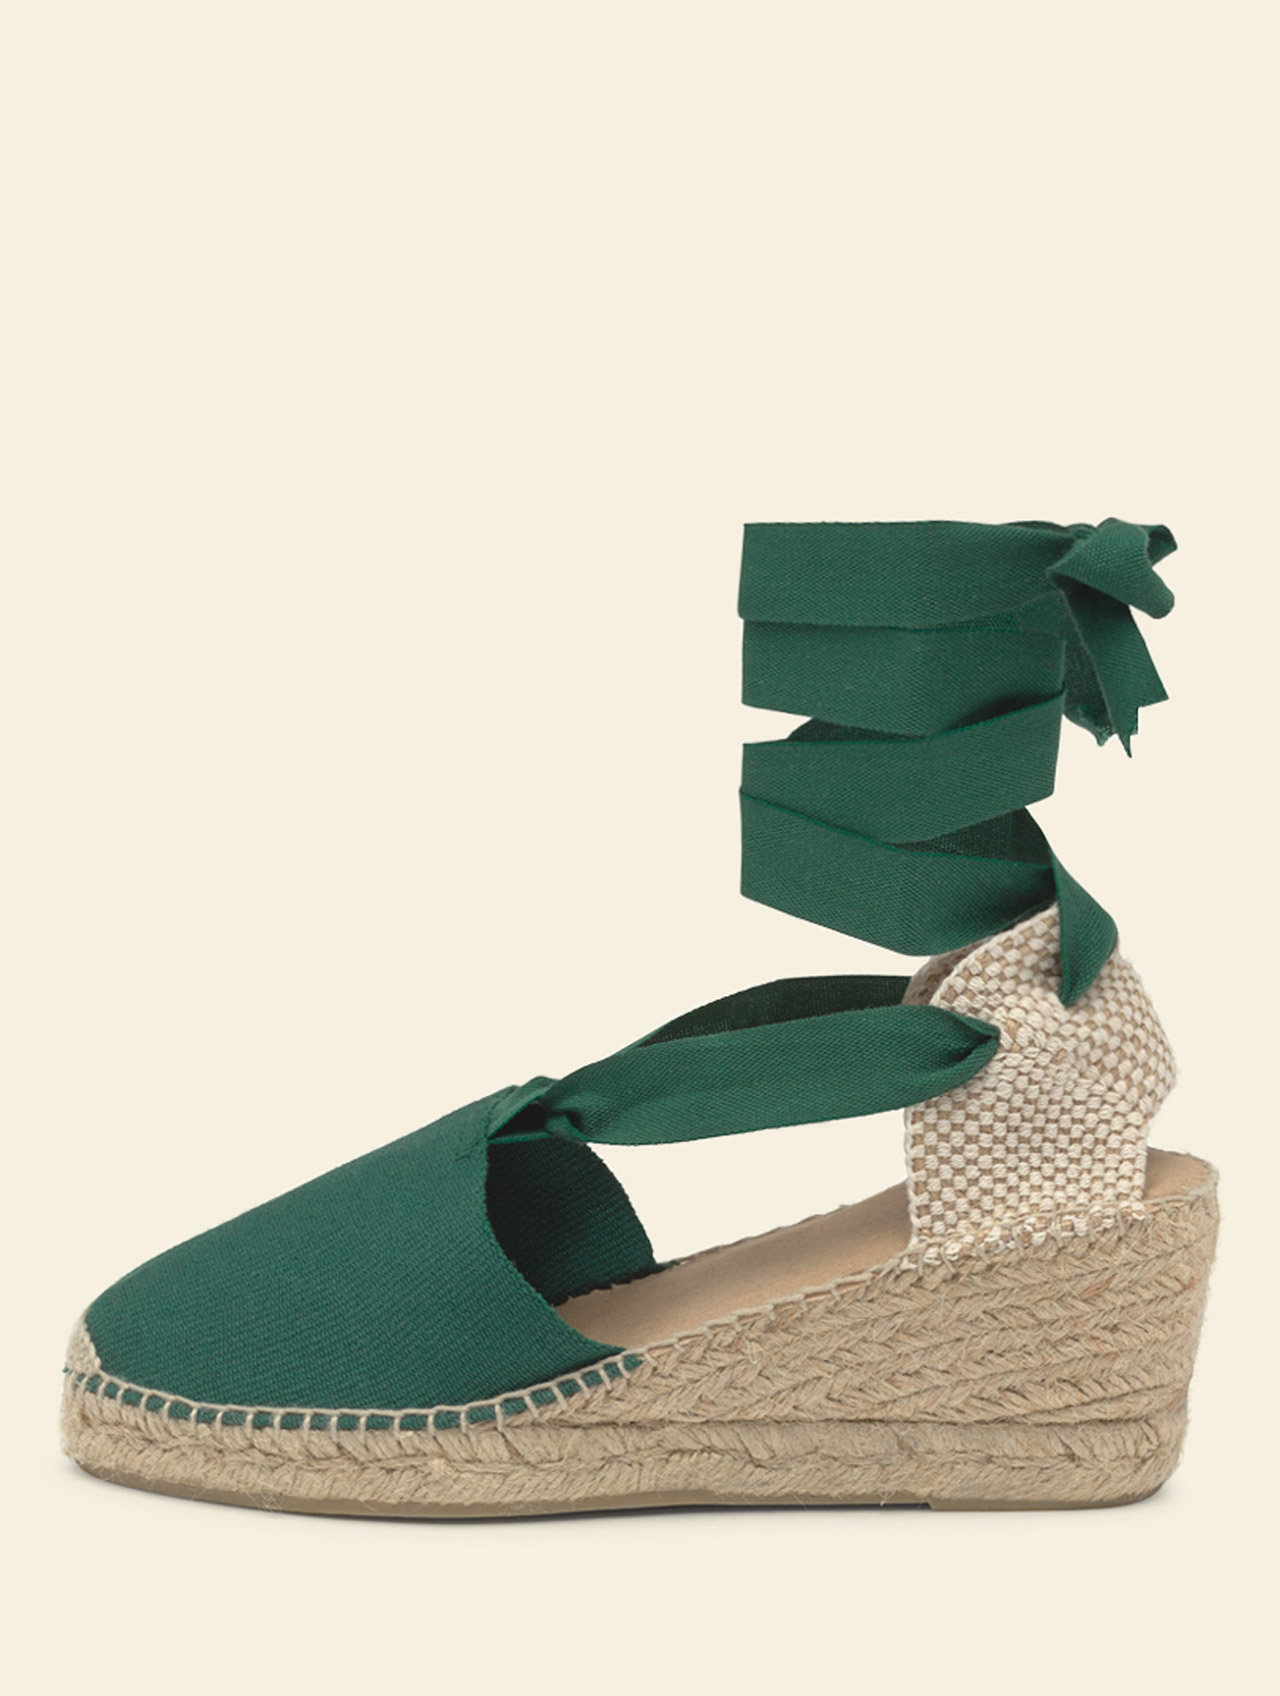 Lace up woman Valenciana espadrille handmade, natural yute wedge about 6 cm. Various colors available. Padded insole Comfortable tie up espadrille made by La Manual Alpargatera Barcelona. Green color